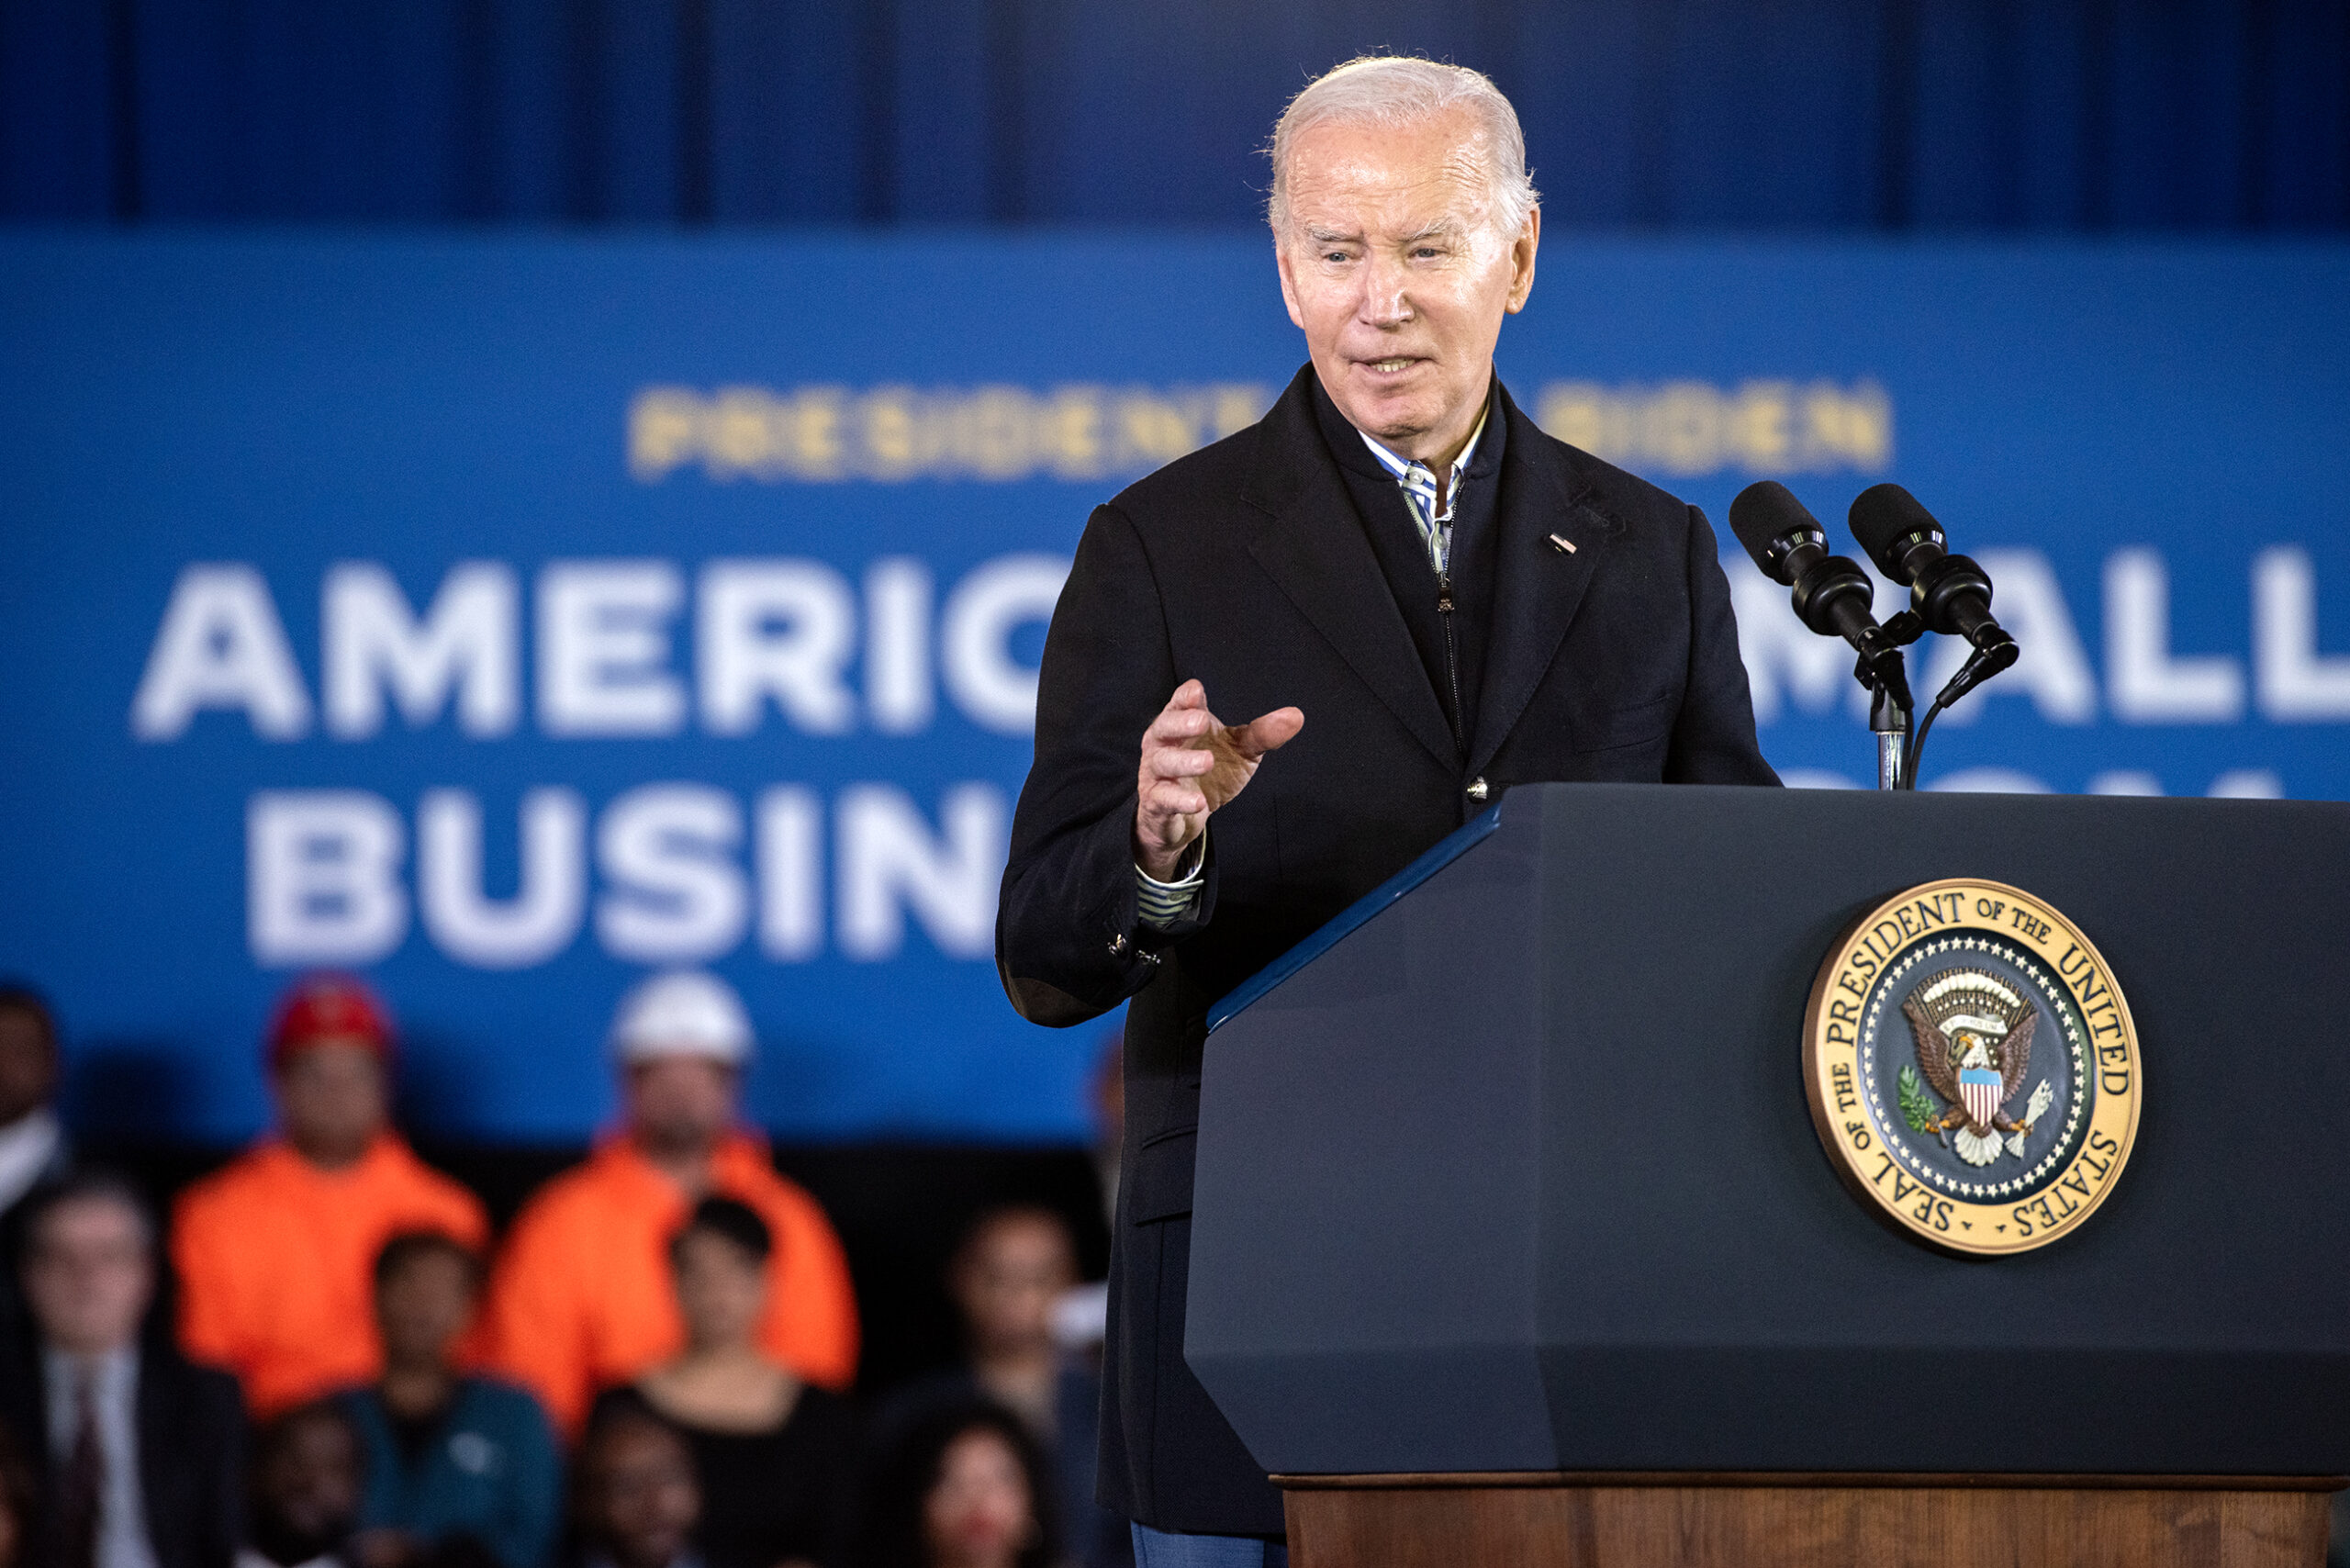 President Joe Biden visits Milwaukee to voice support for Black-owned business ownership